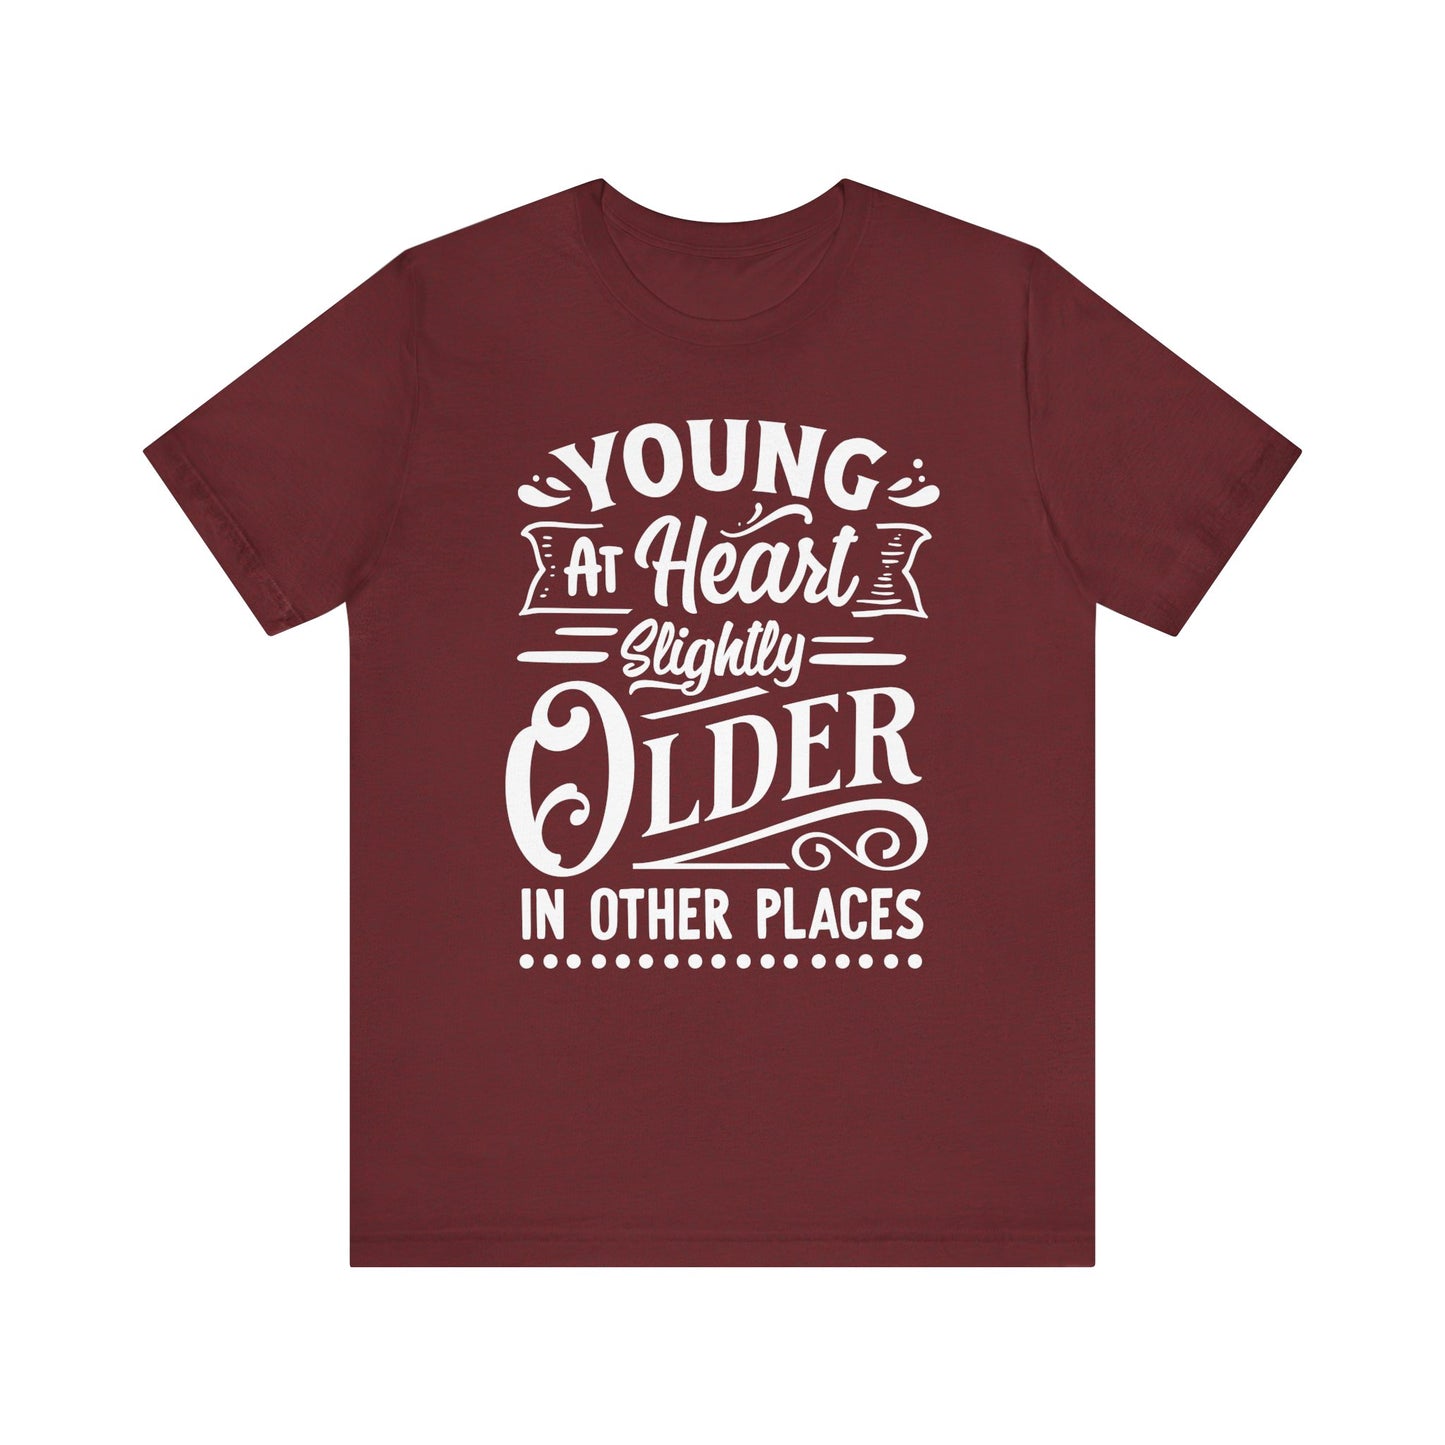 Young At Heart T-Shirt For Getting Older T Shirt For Aging TShirt For Birthday Gift